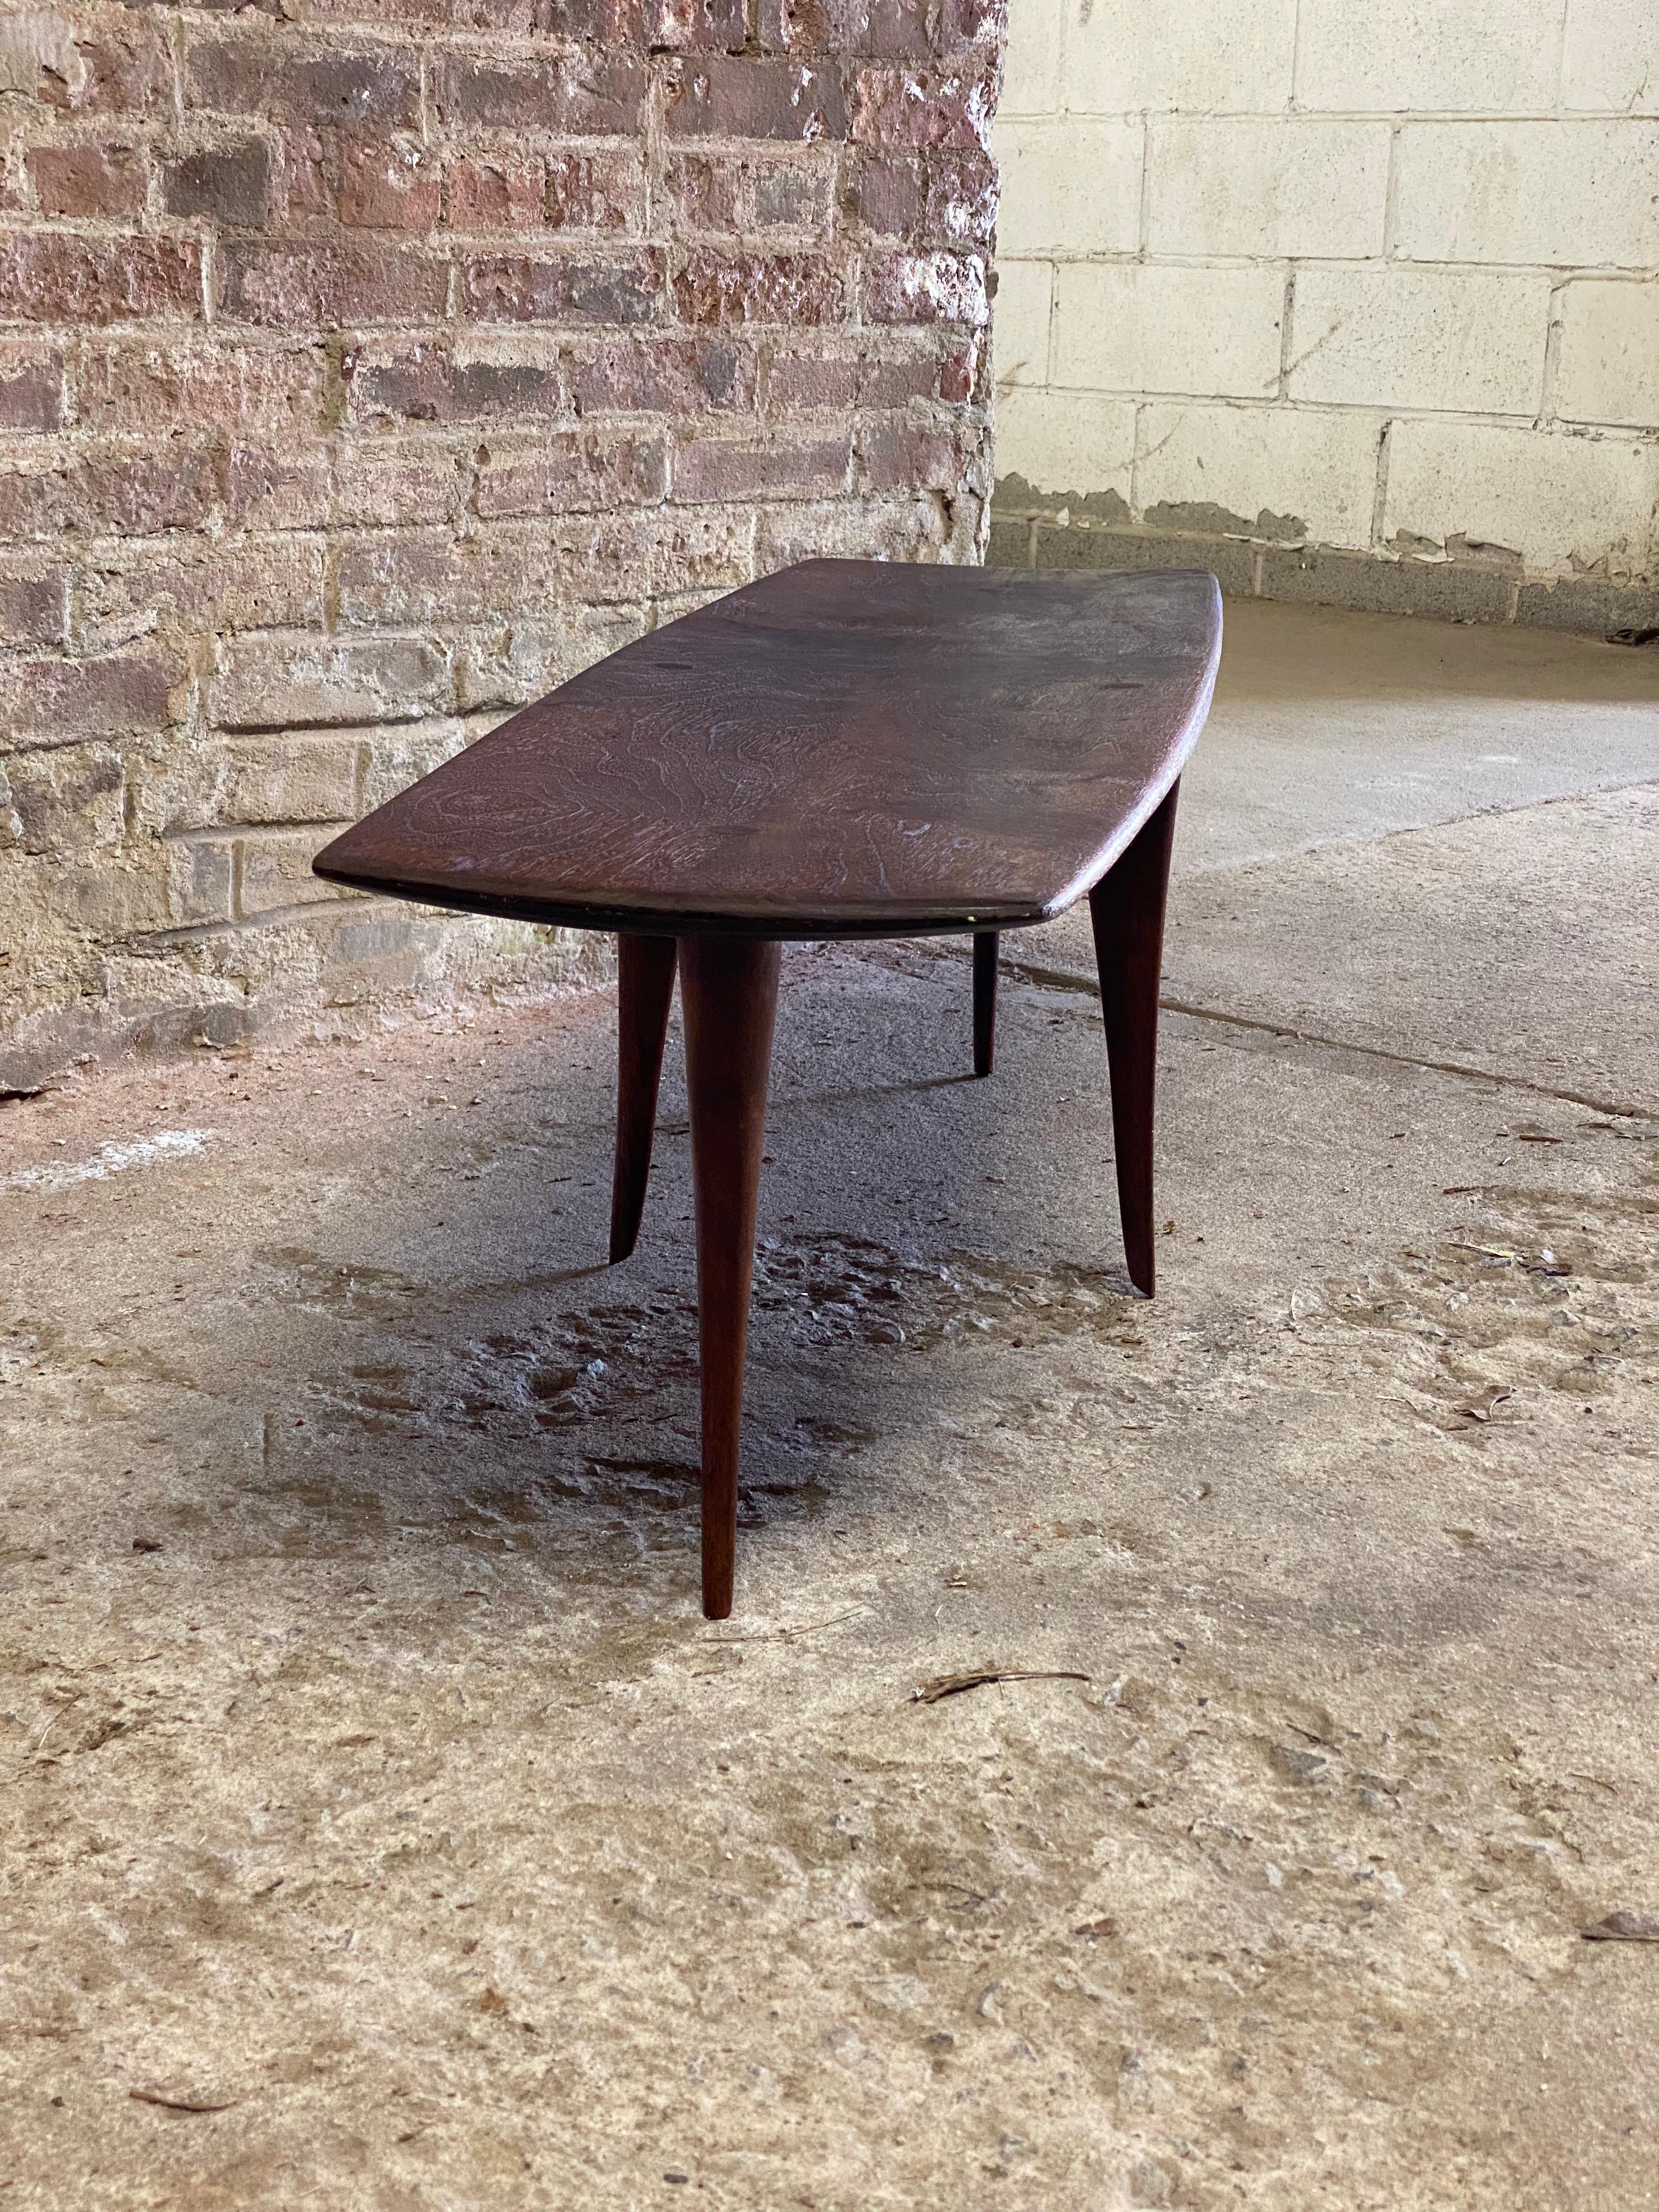 Mid-20th Century Dirk Rosse American Studio Crafts Movement Walnut Coffee Table For Sale